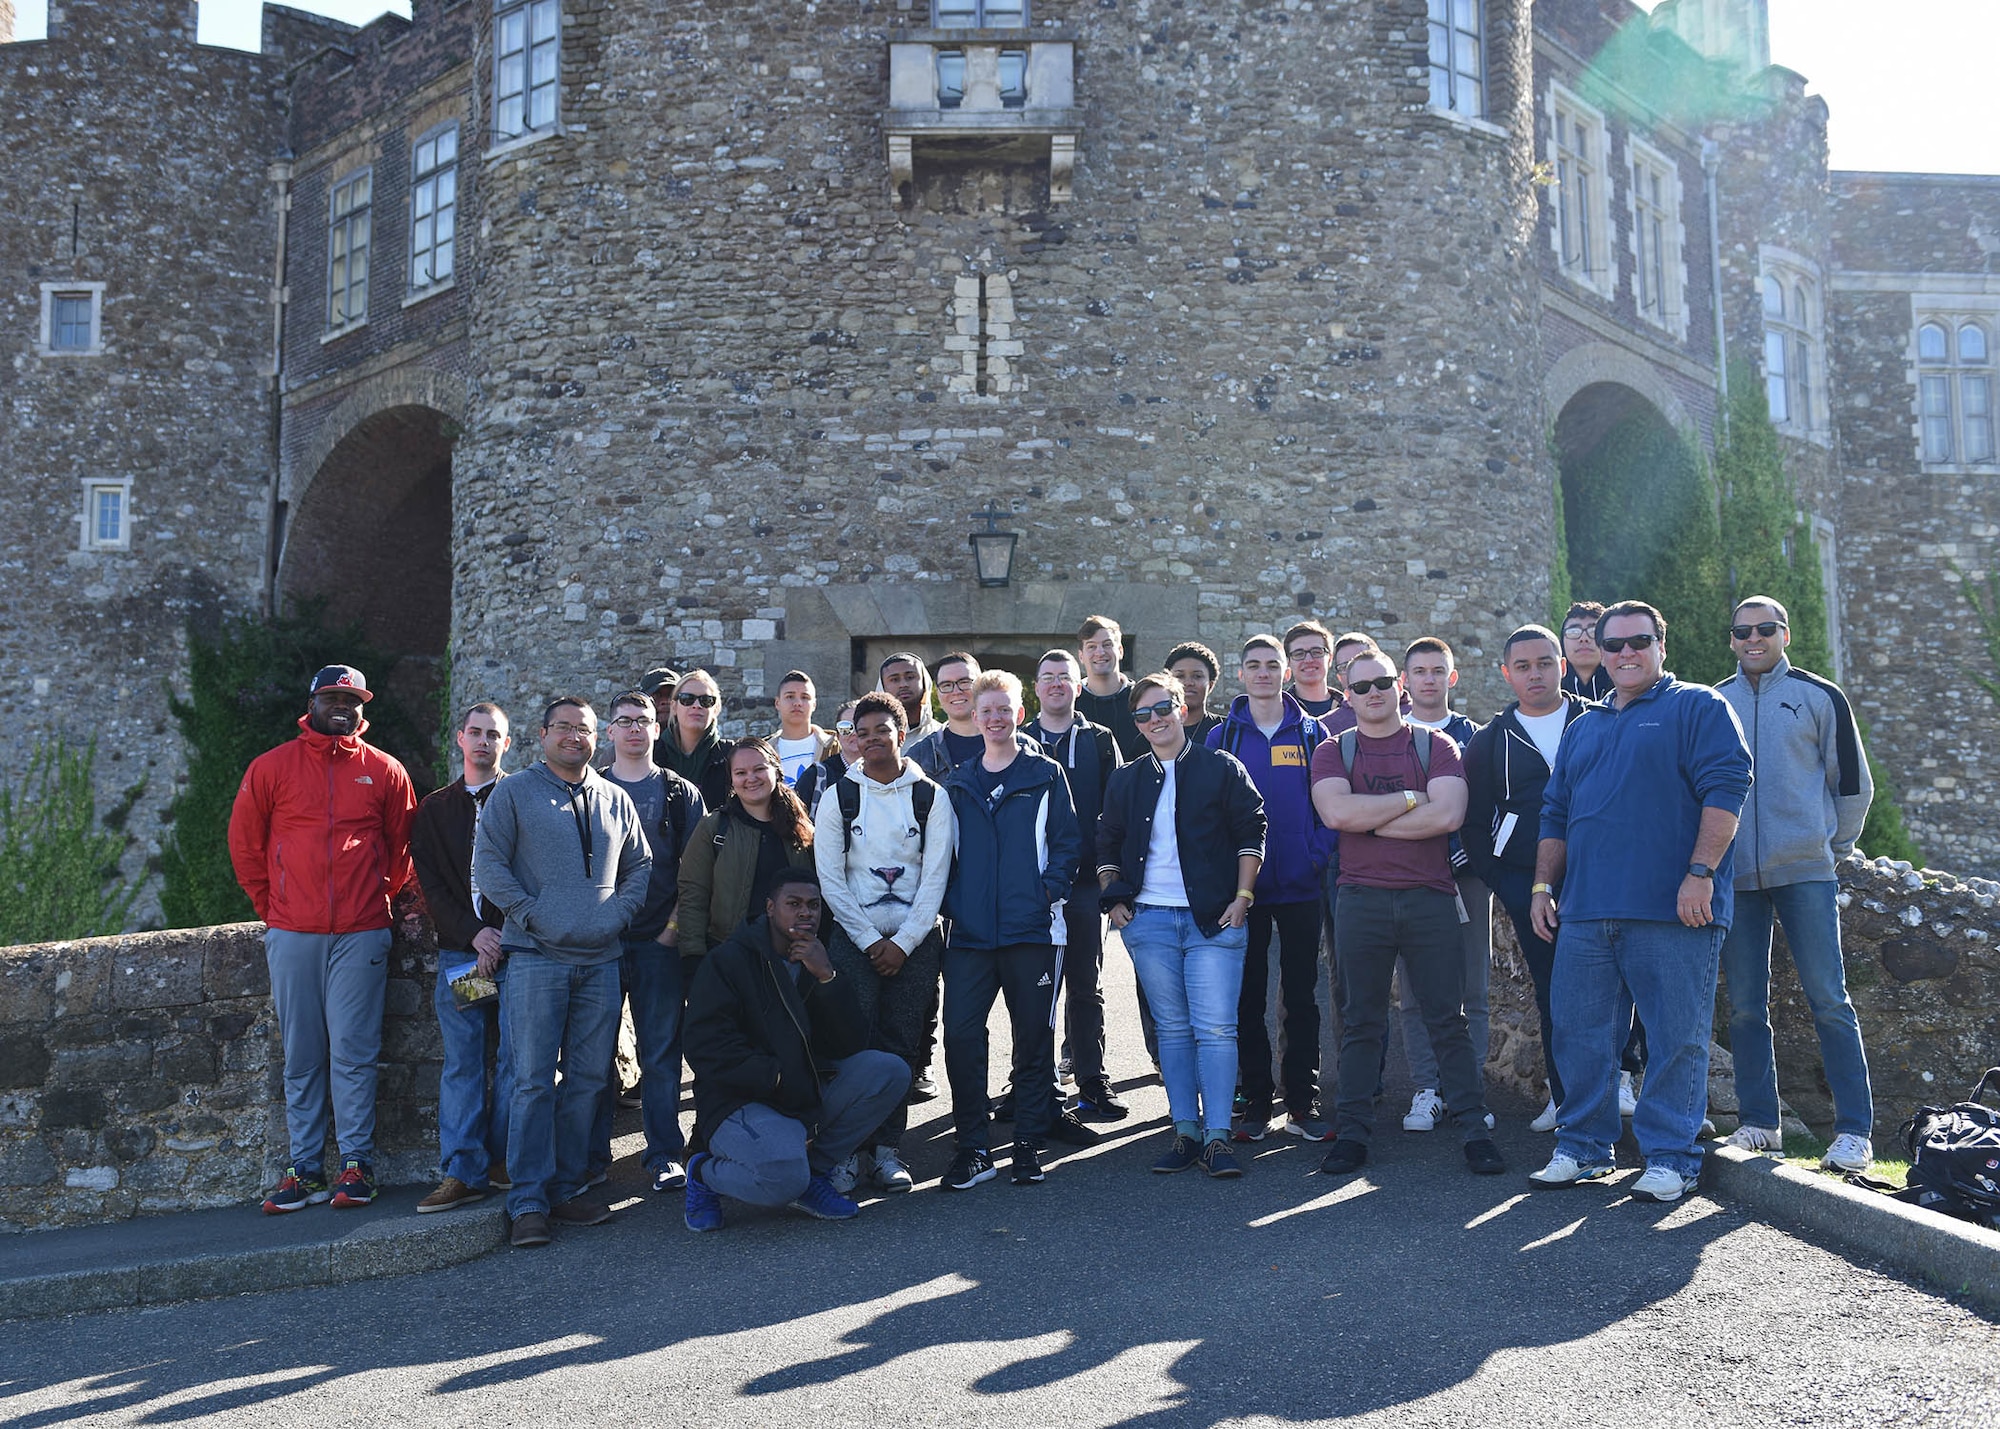 Team Mildenhall Airmen gather during a resiliency trip to Dover Castle in Dover, England, Sept. 7, 2018. The trip included a self-guided tour of the castle, along with an underground hospital and a realistic representation of Operation Dynamo. Operation Dynamo was the rescue and evacuation of 338,000 Allied troops from Dunkirk in May 1940. (U.S. Air Force photo by Senior Airman Luke Milano)